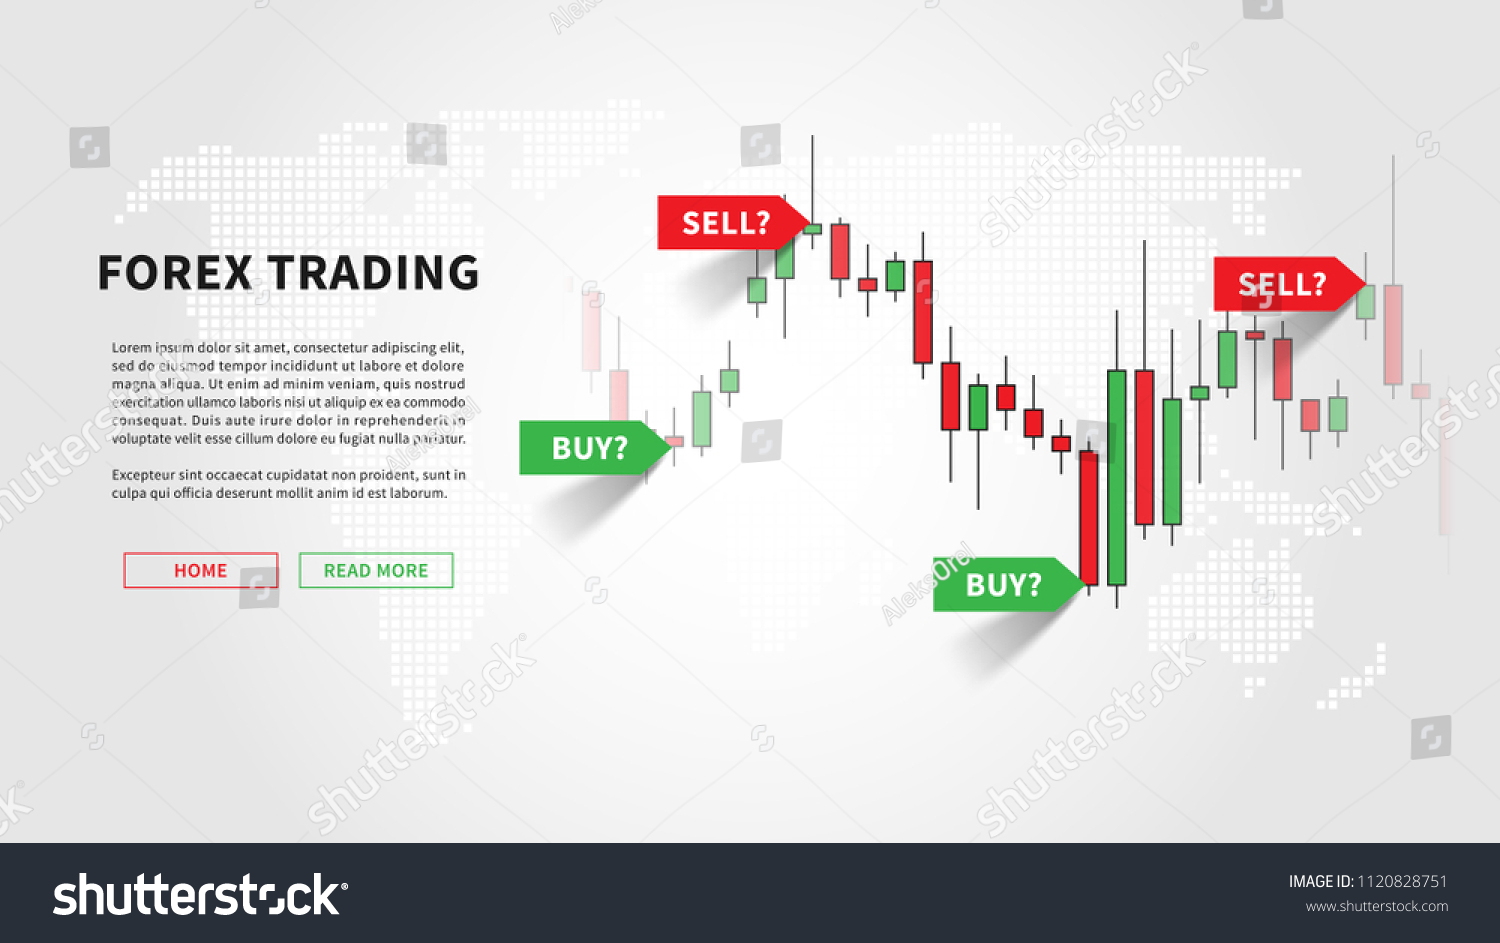 SVG of Forex trading promo page vector illustration. Web banner template for trading companies graphic design. Financial chart with signals to buy and sell for stock exchange market concept. svg